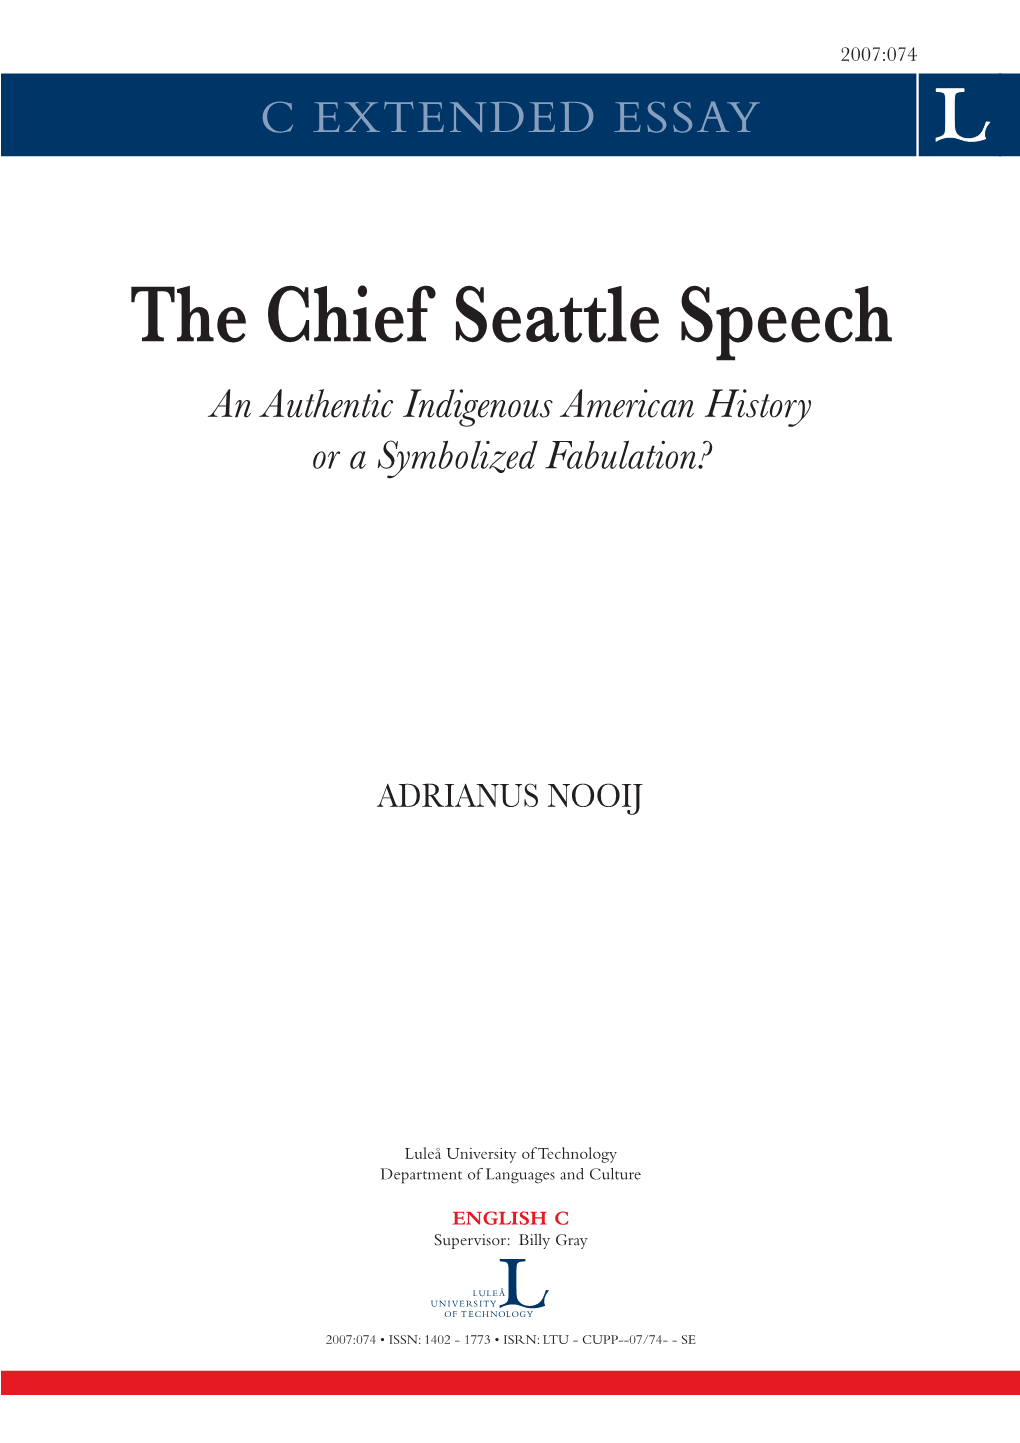 The Chief Seattle Speech an Authentic Indigenous American History Or a Symbolized Fabulation?